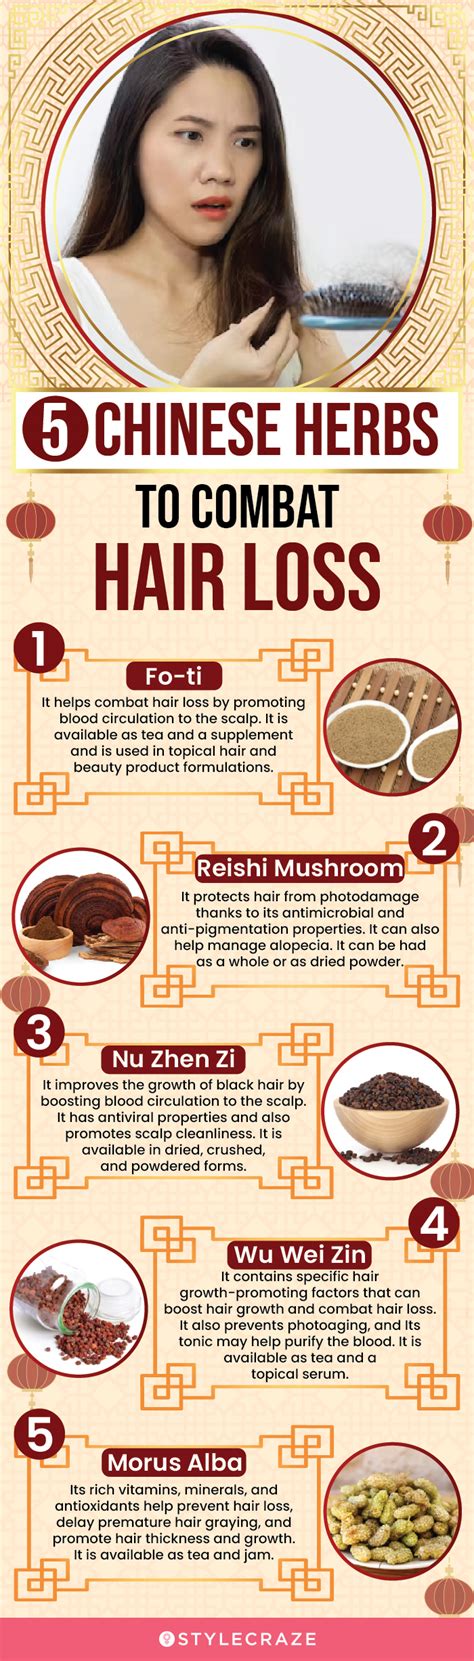 5 Chinese Herbs That May Help In Treating Hair Loss